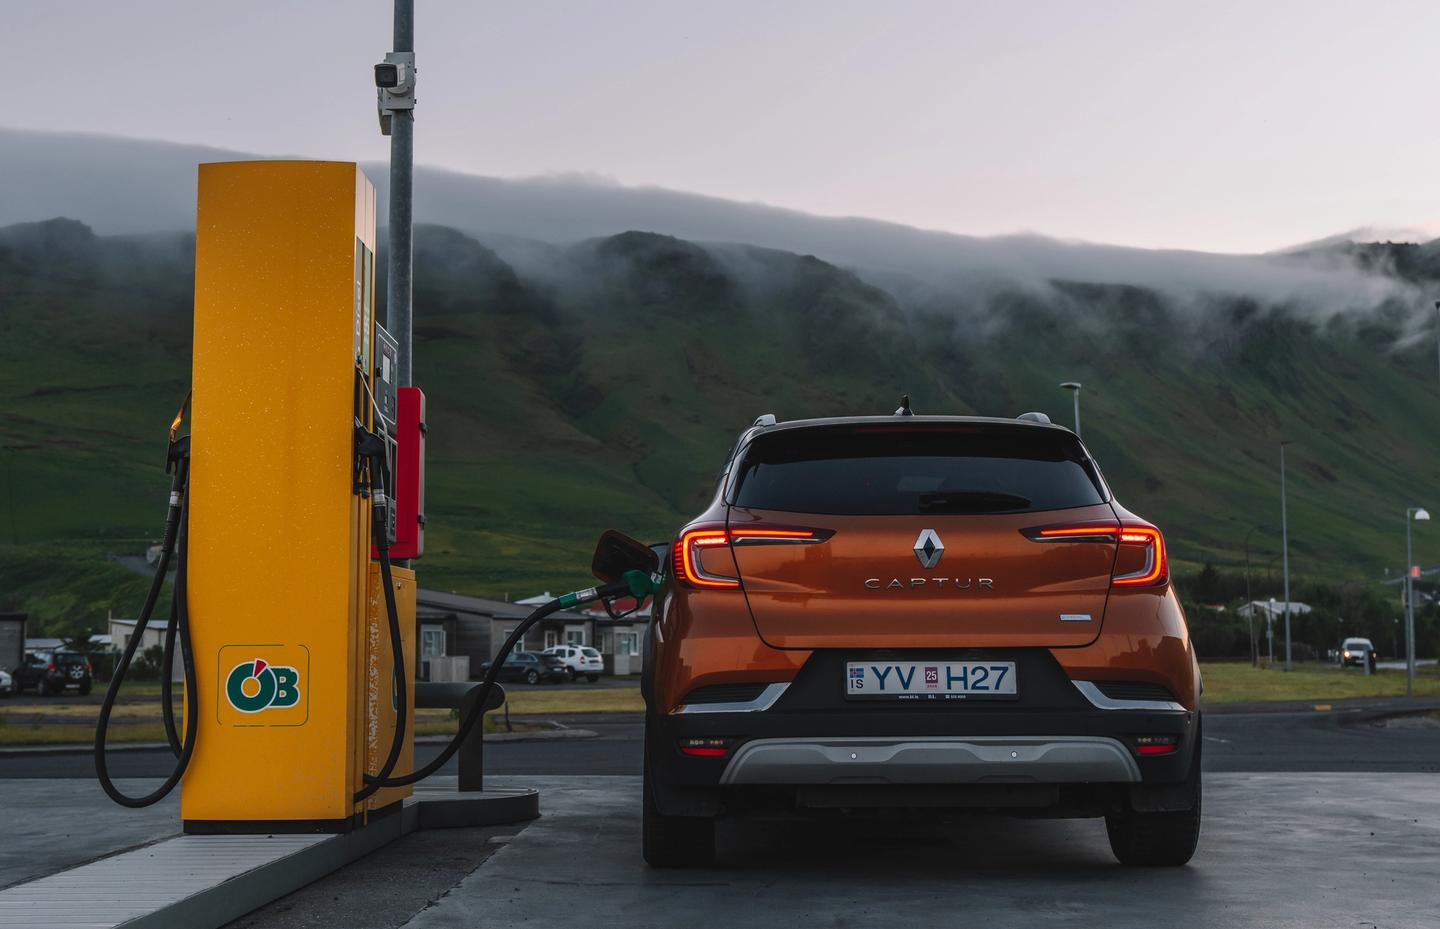 A rental car in Iceland taking gas at ÓB gas station